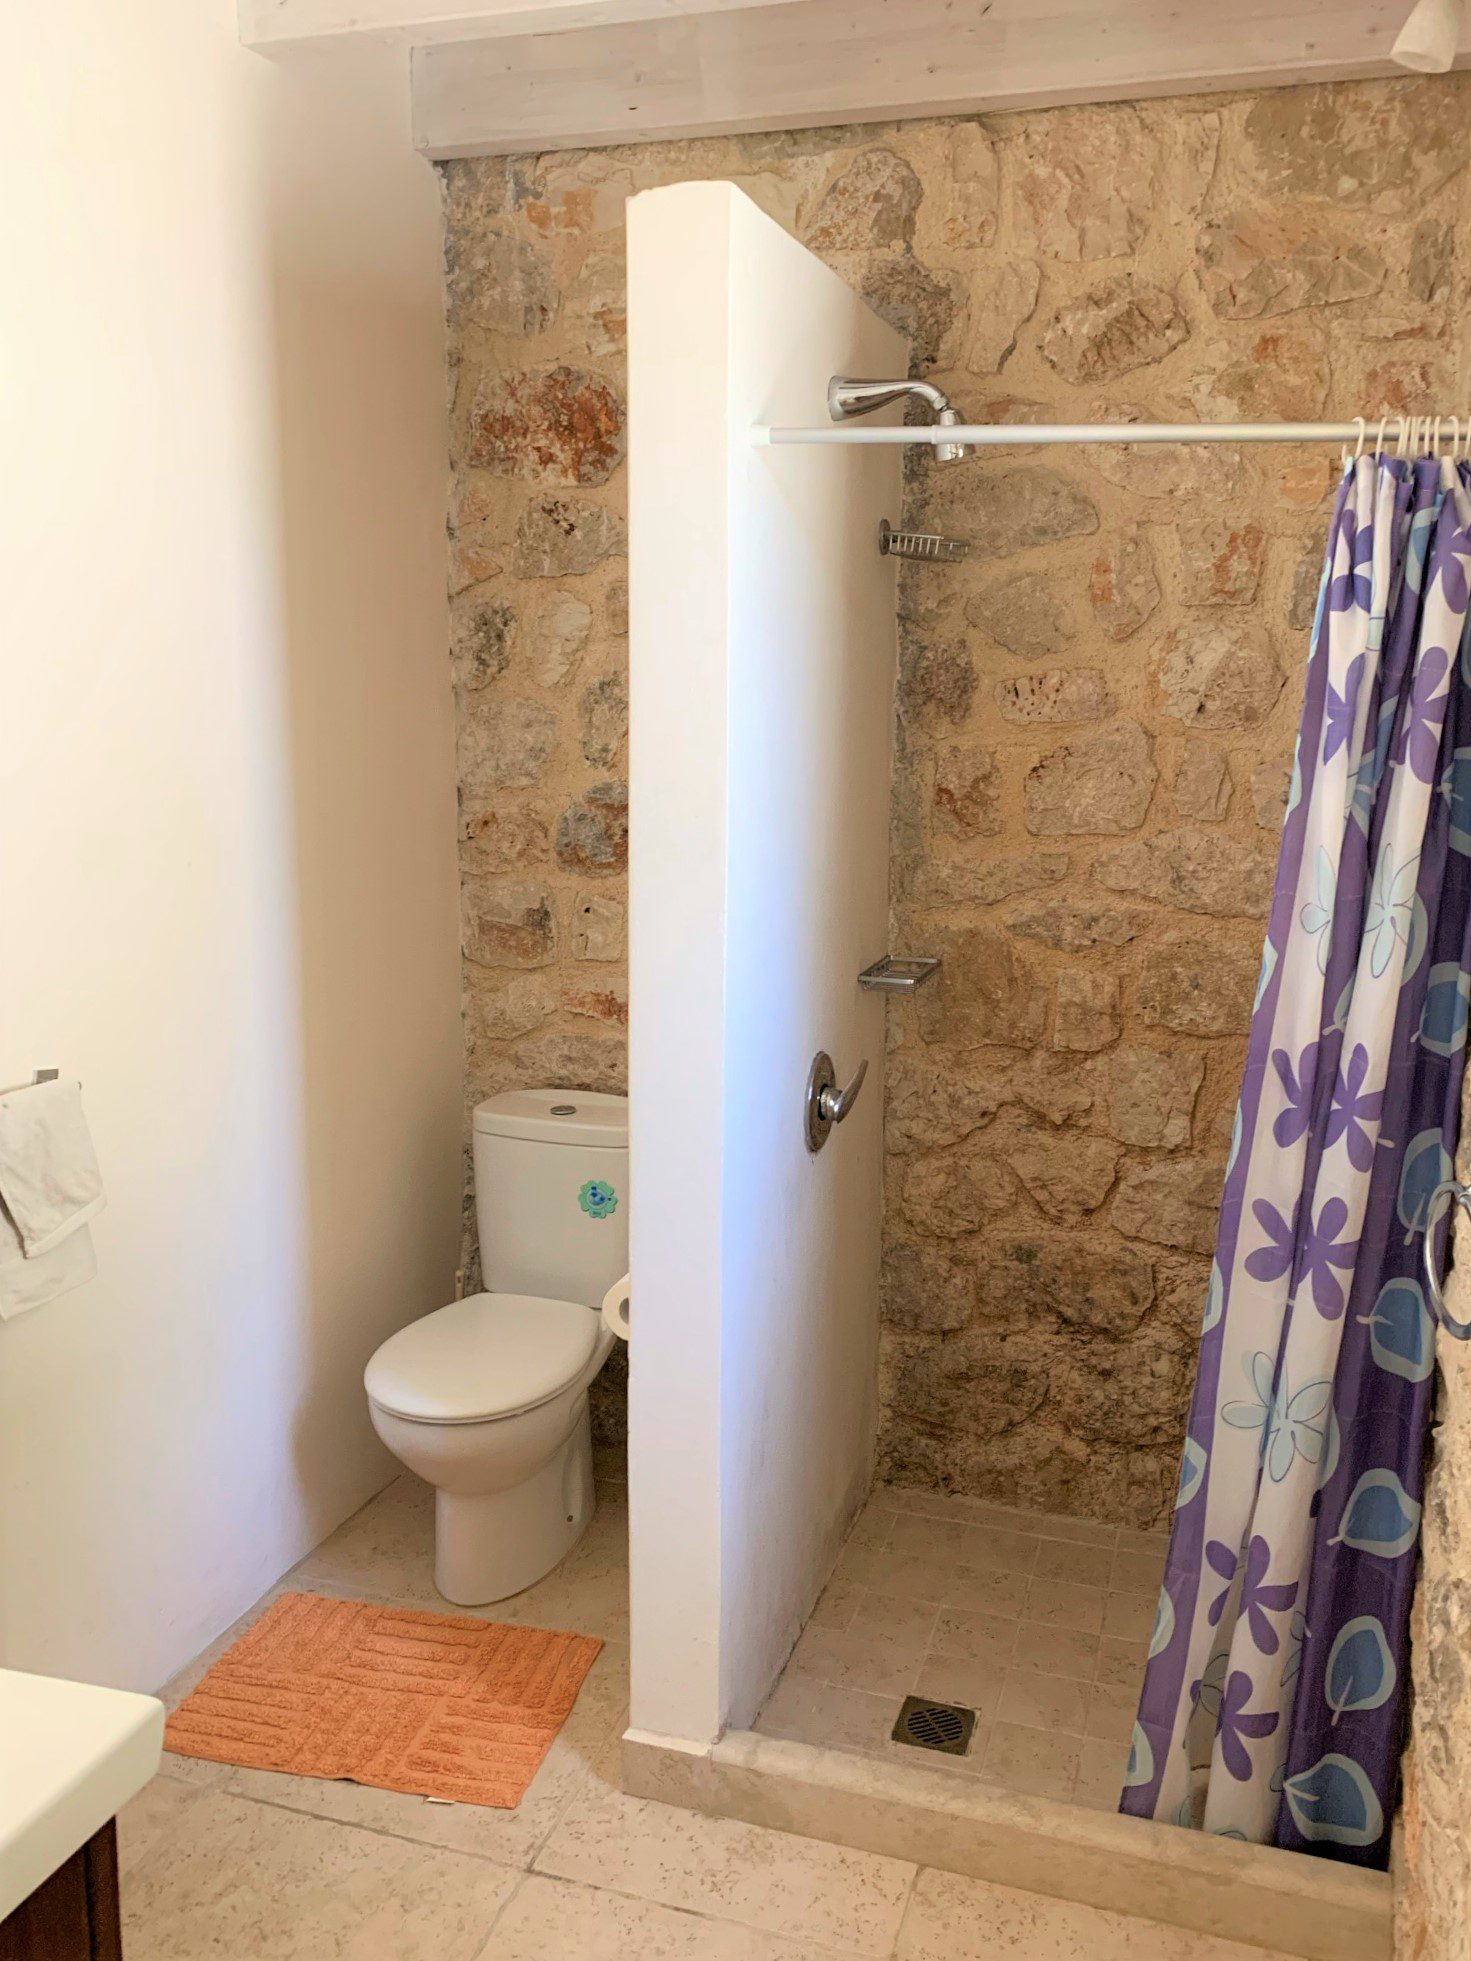 Bathroom of holiday houses for rent on Ithaca Greece, Stavros